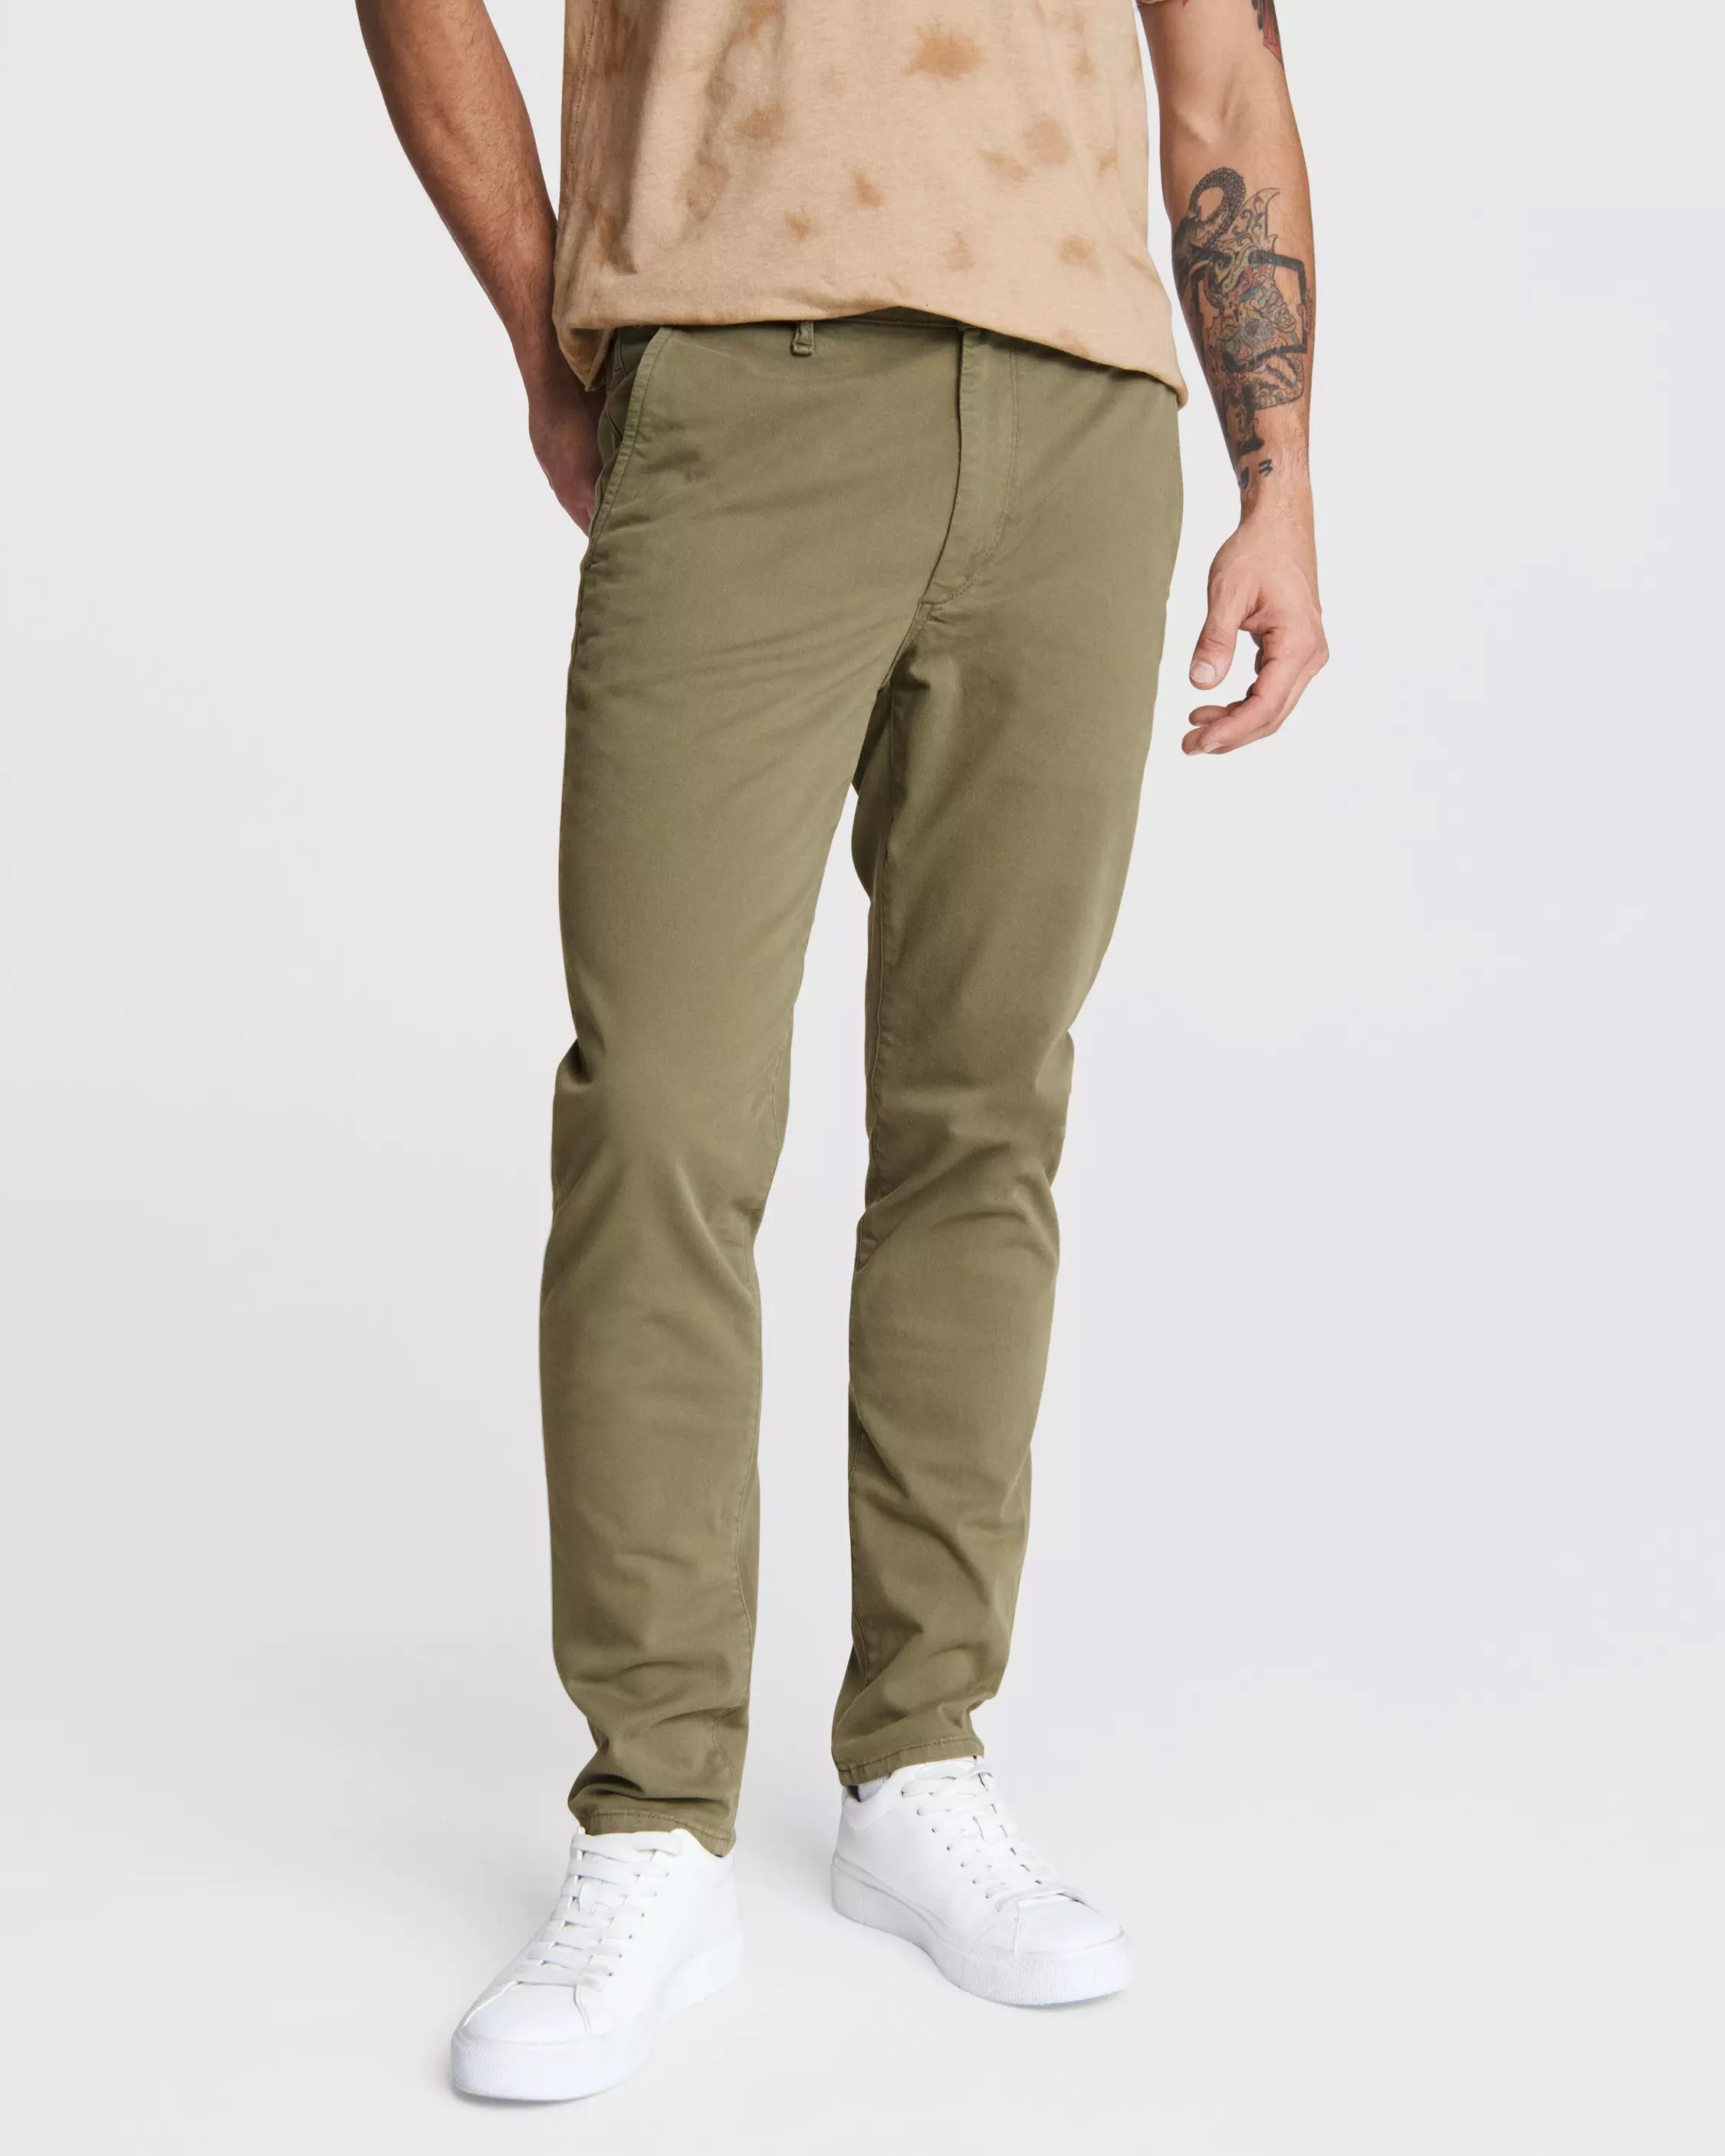 Mens Jeans Designer Stretch Slim Fit Chinos Trousers All Waist Sizes Holt -  Walmart.com